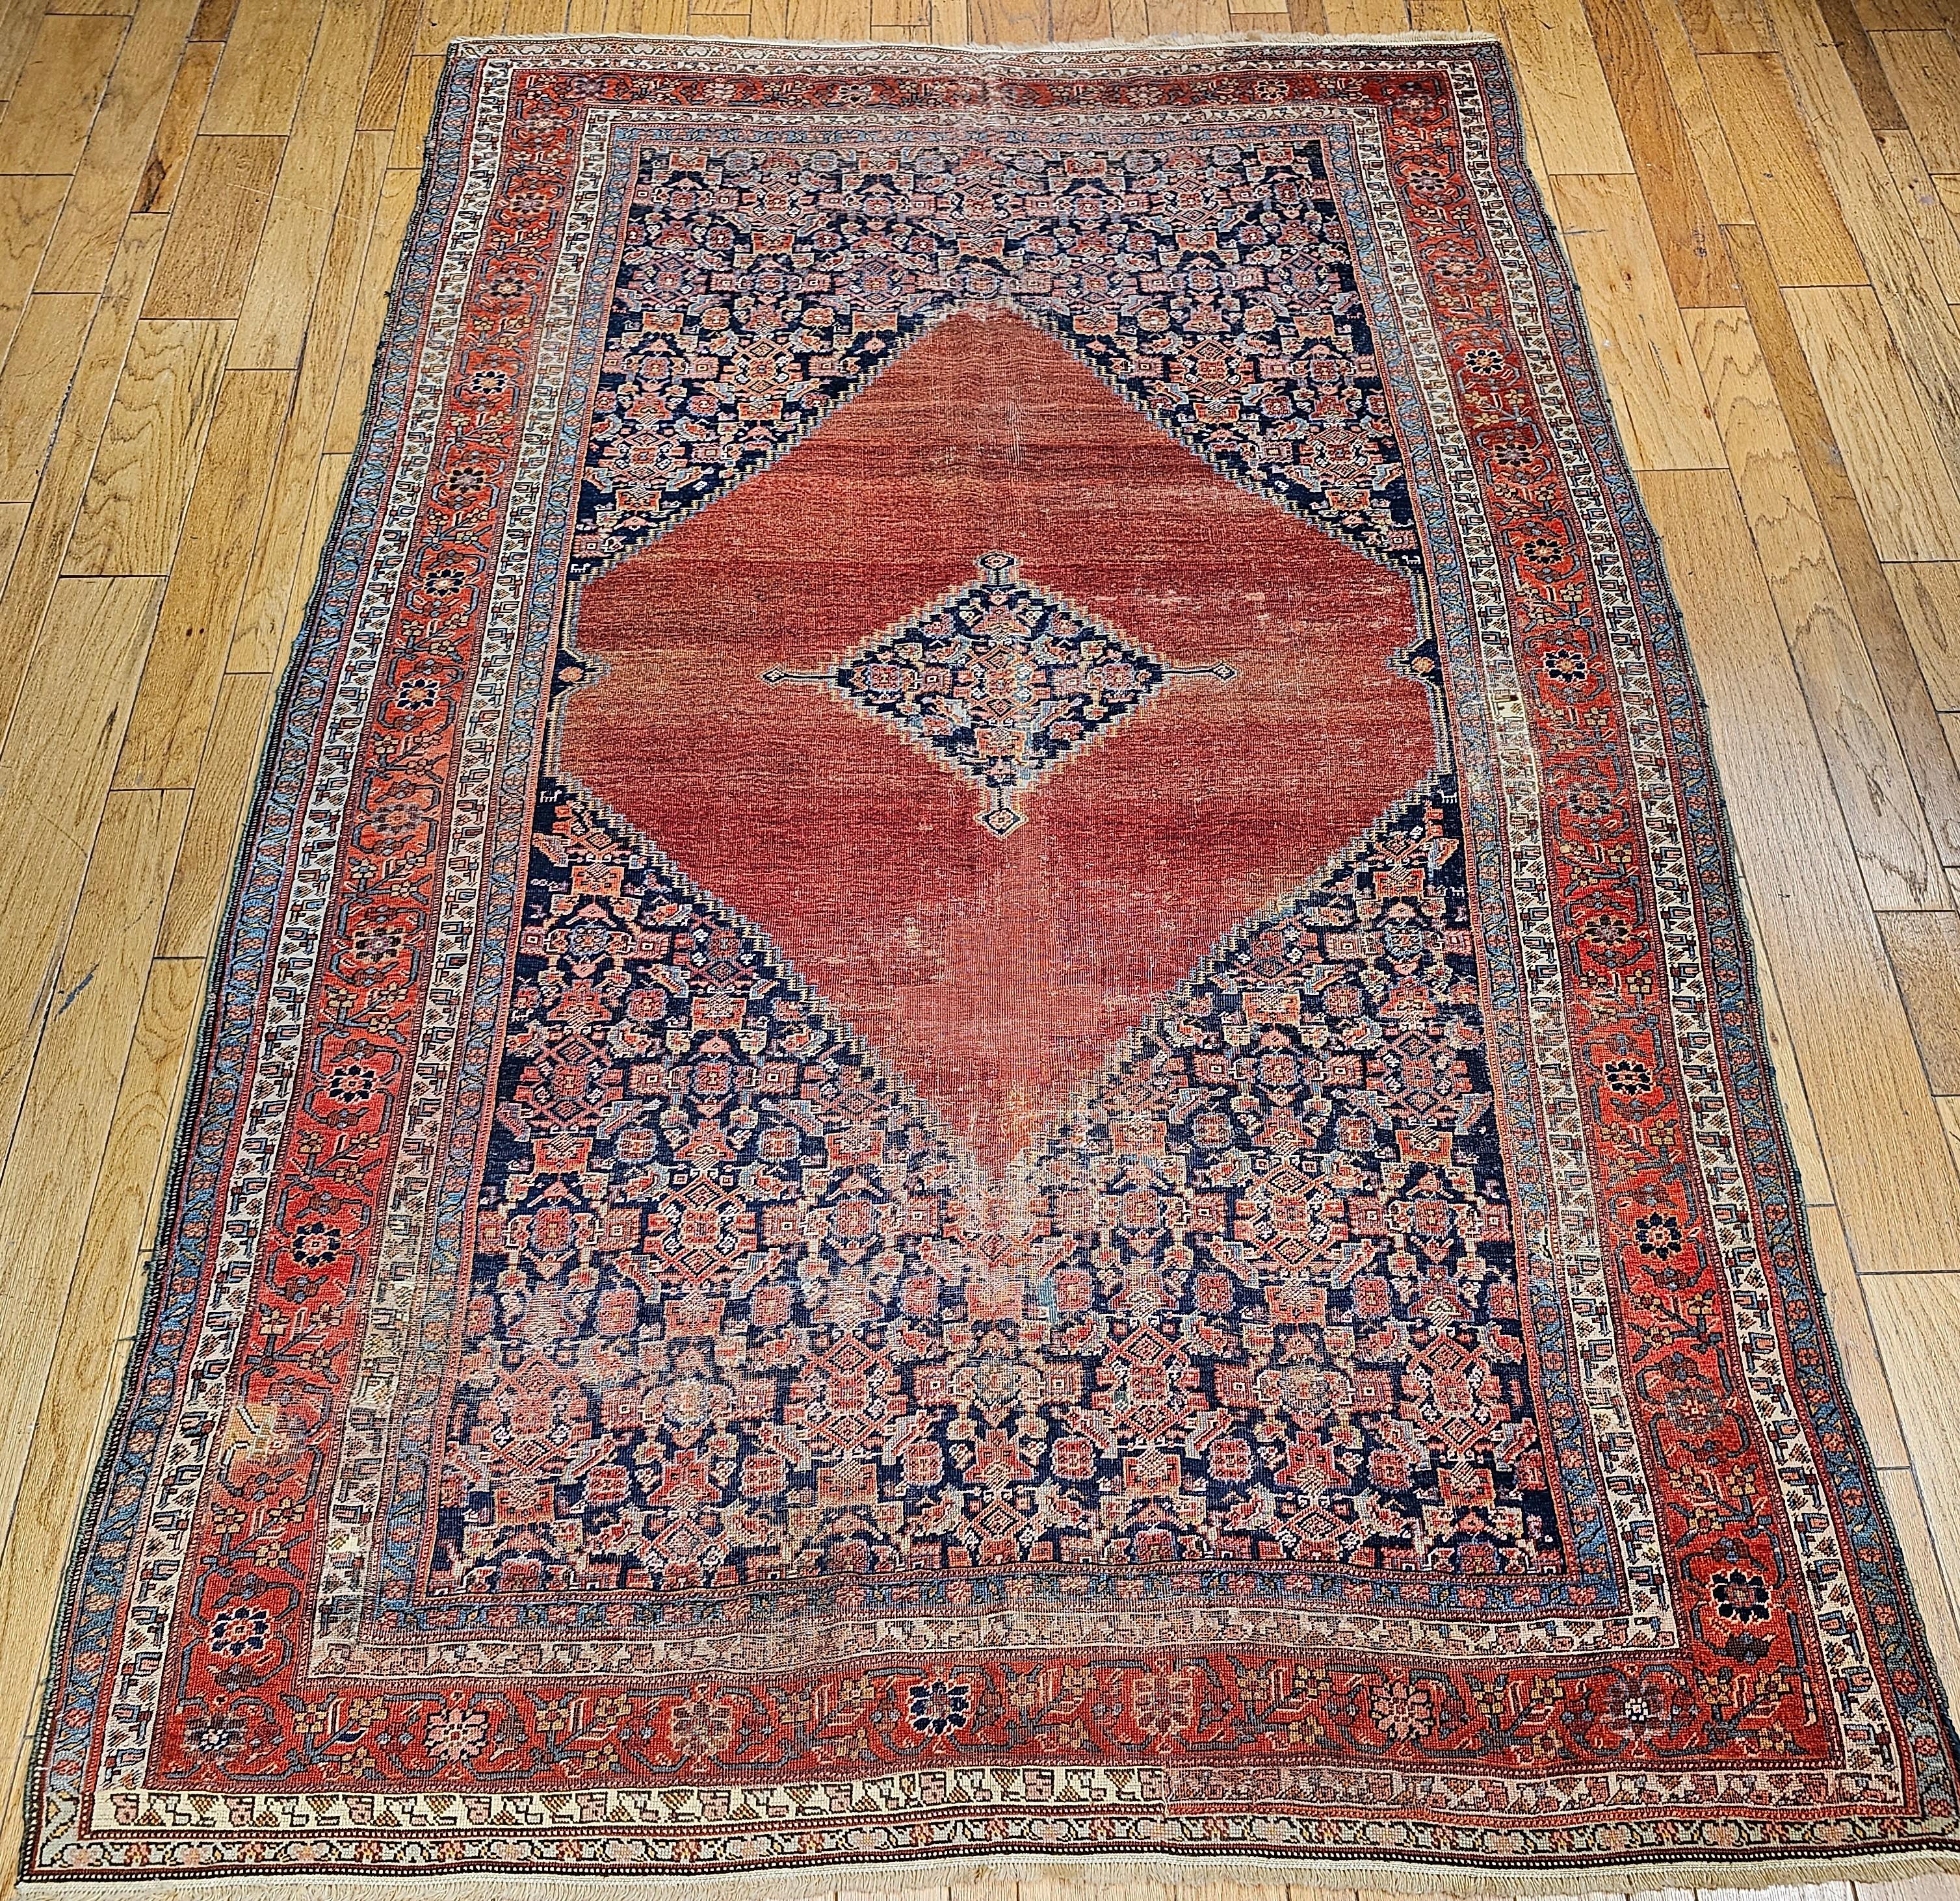 Astonishing beautiful antique Persian Malayer room size rug from the late 1800s. The rug has one of the most gorgeous medallion designs in terracotta red with a smaller central medallion in a dark navy blue color field which makes the combination